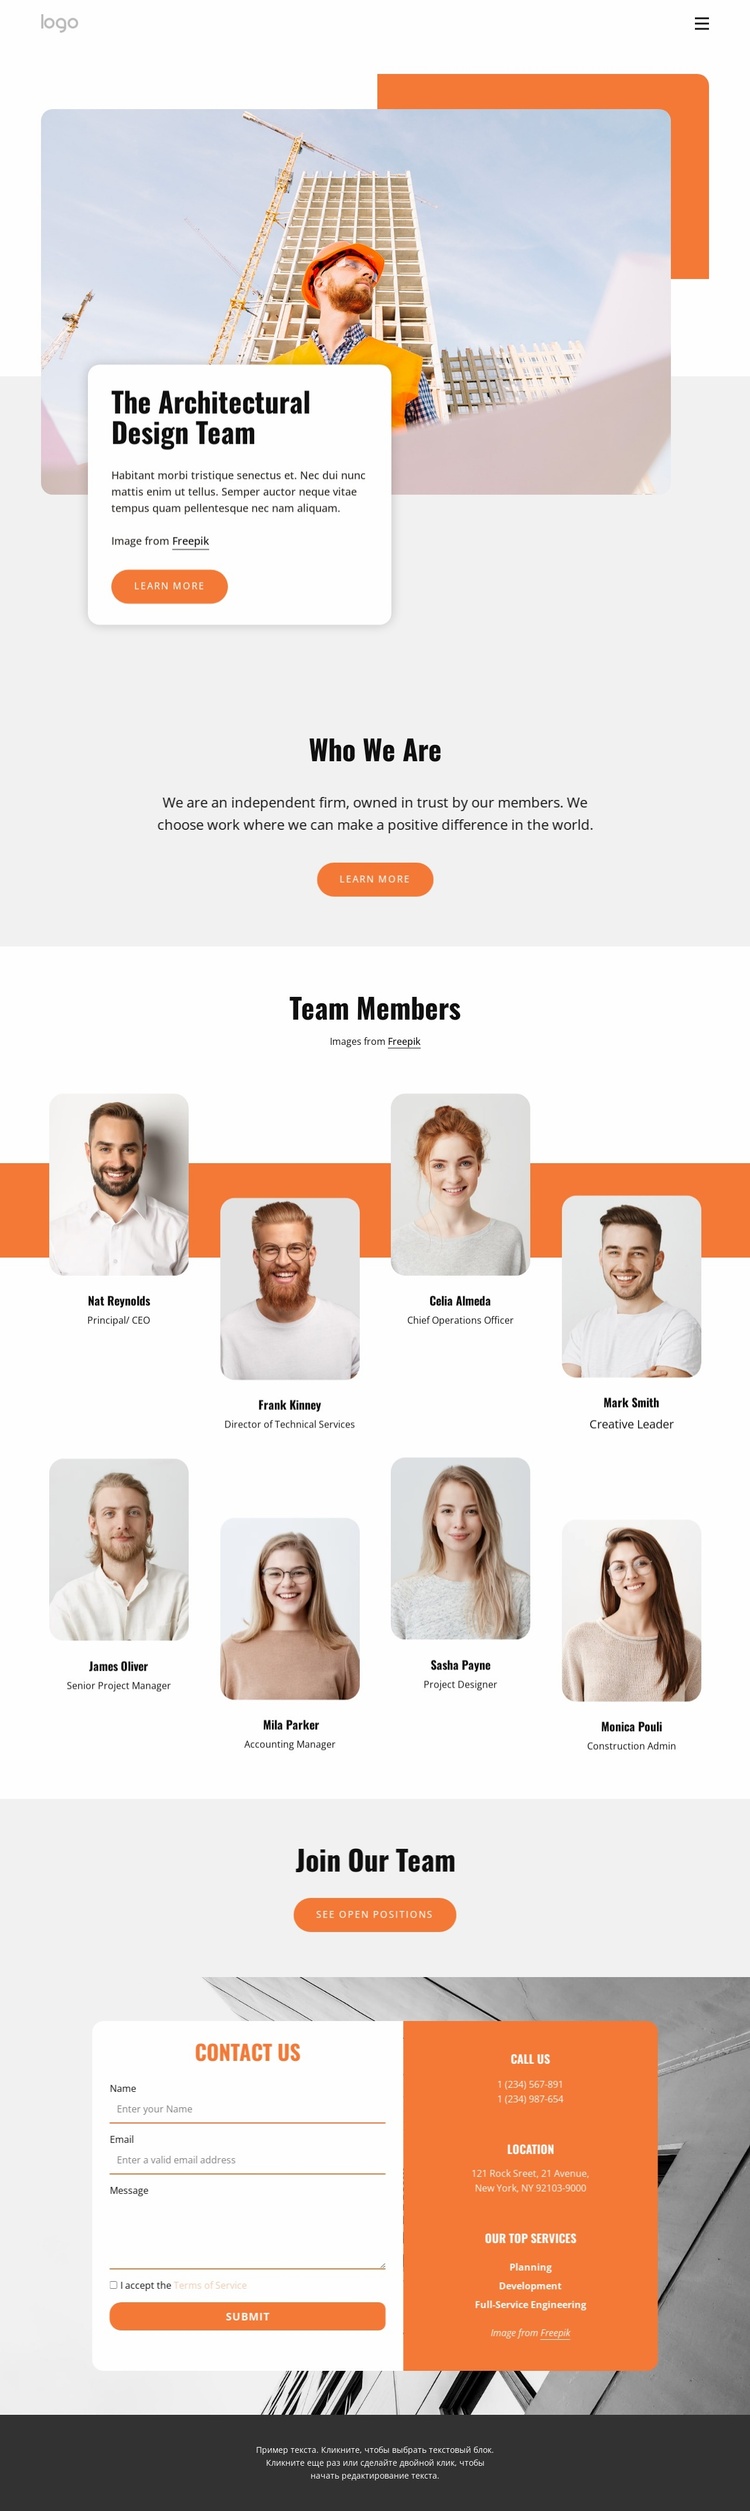 The planning firm with 53 offices and 7000+ professionals Website Template